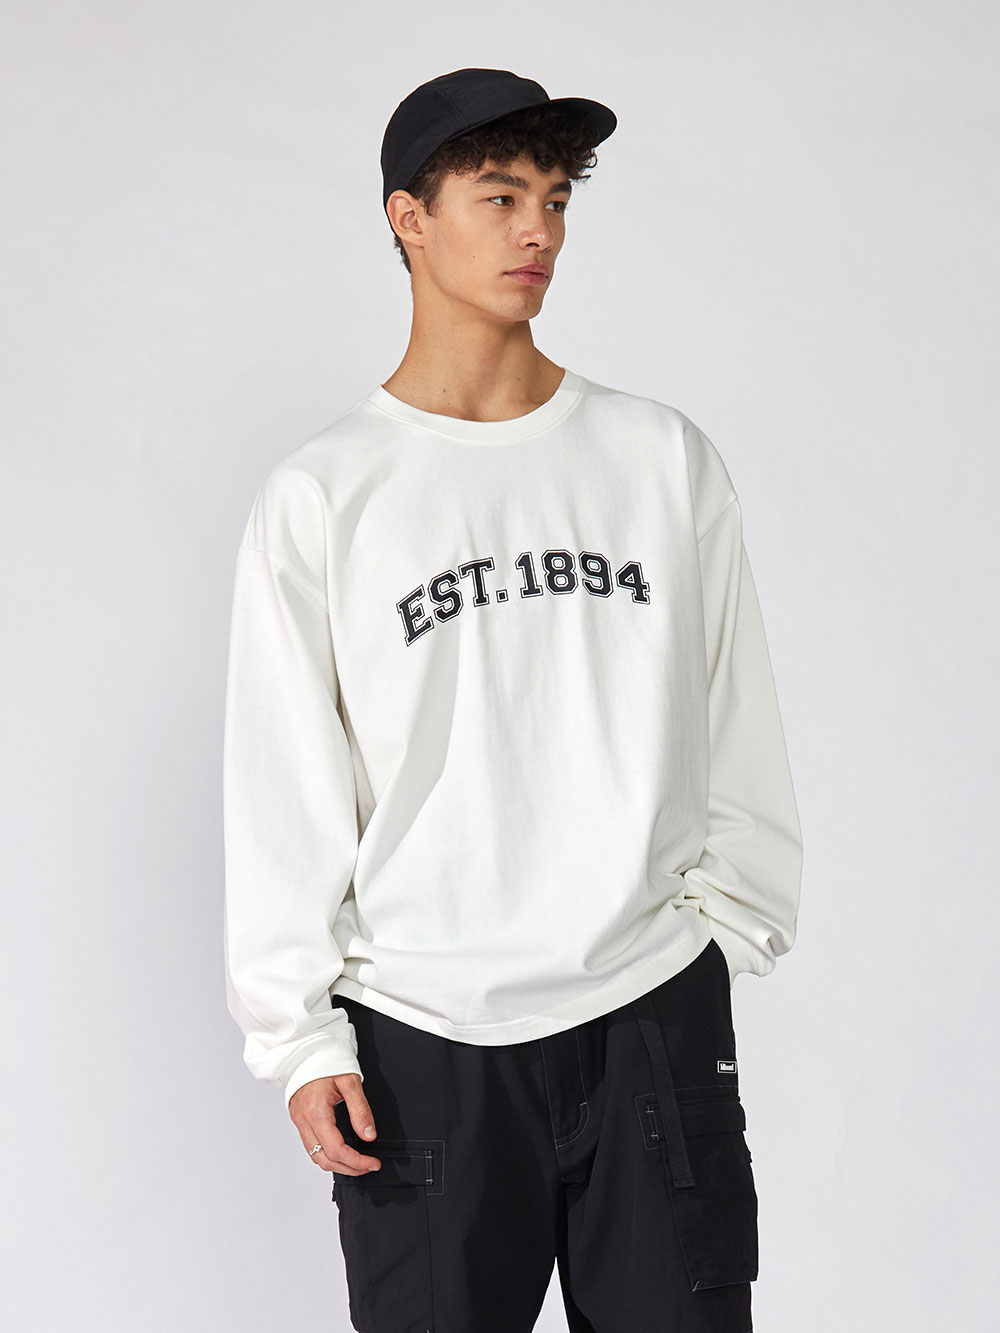 EST1894 Loose Fit Long Sleeve_White